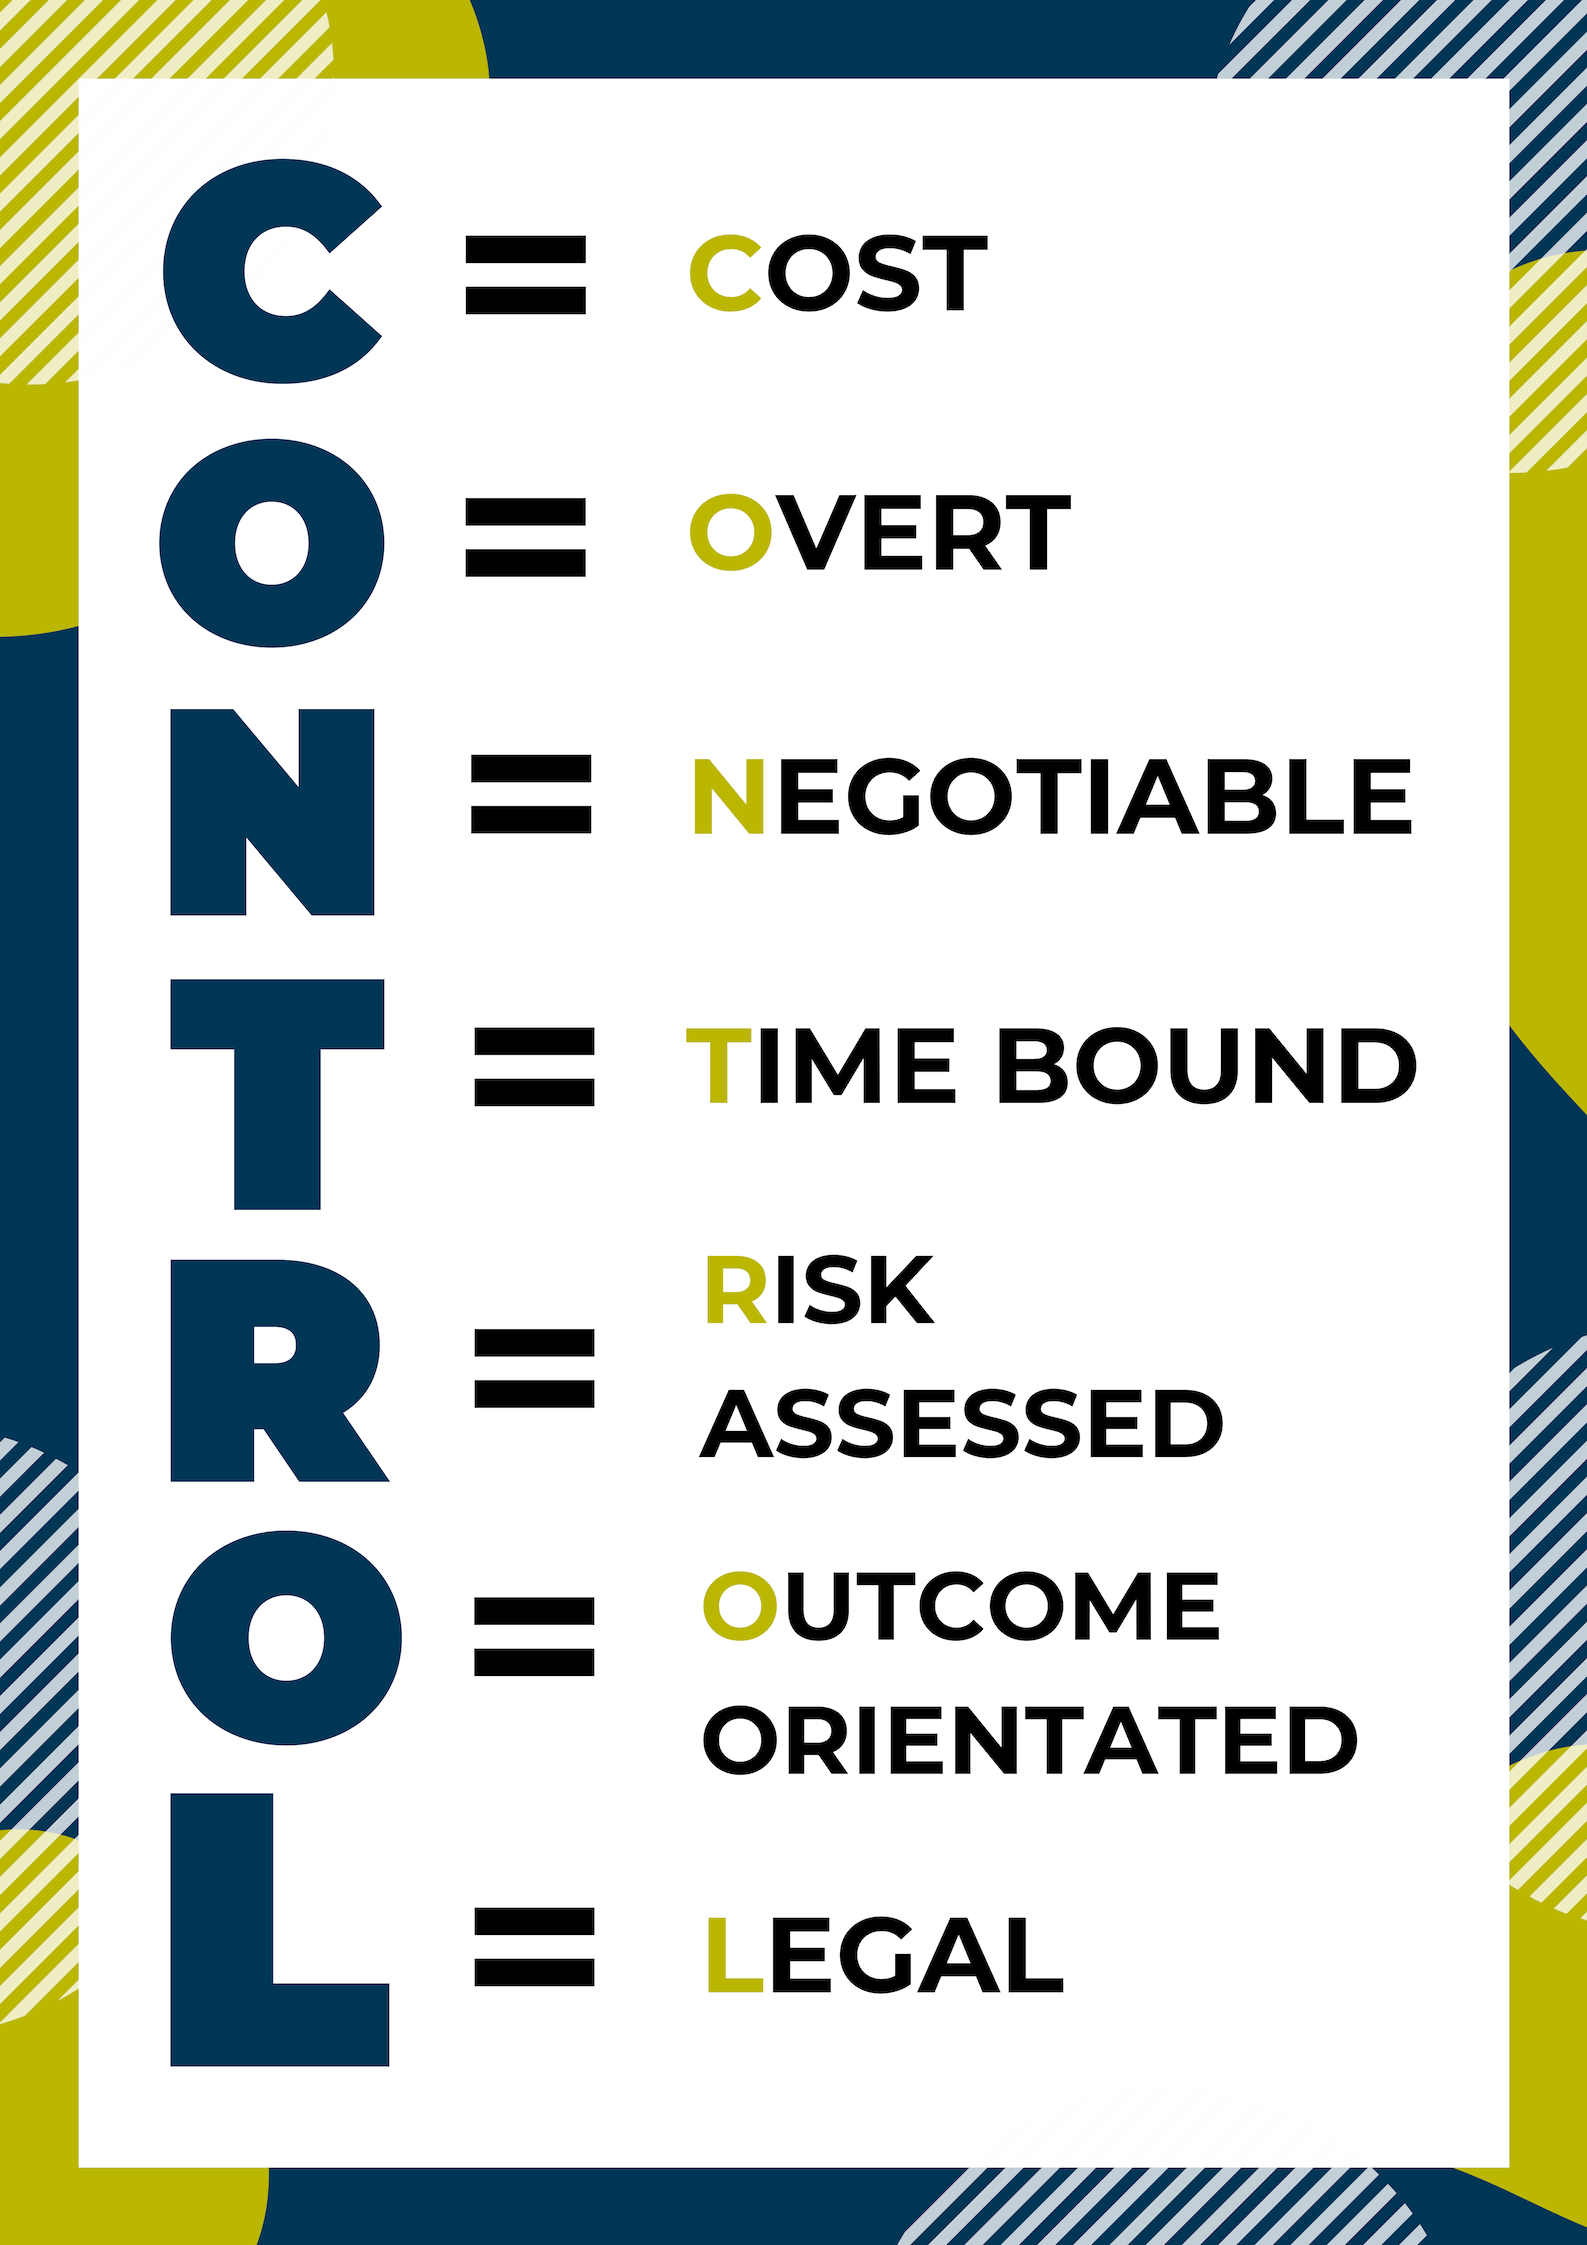 CONTROL acronym listed out. C= cost, O= overt, N= negotiable, T= time bound, R= risk assessed, O= outcome oriented, L= legal. 